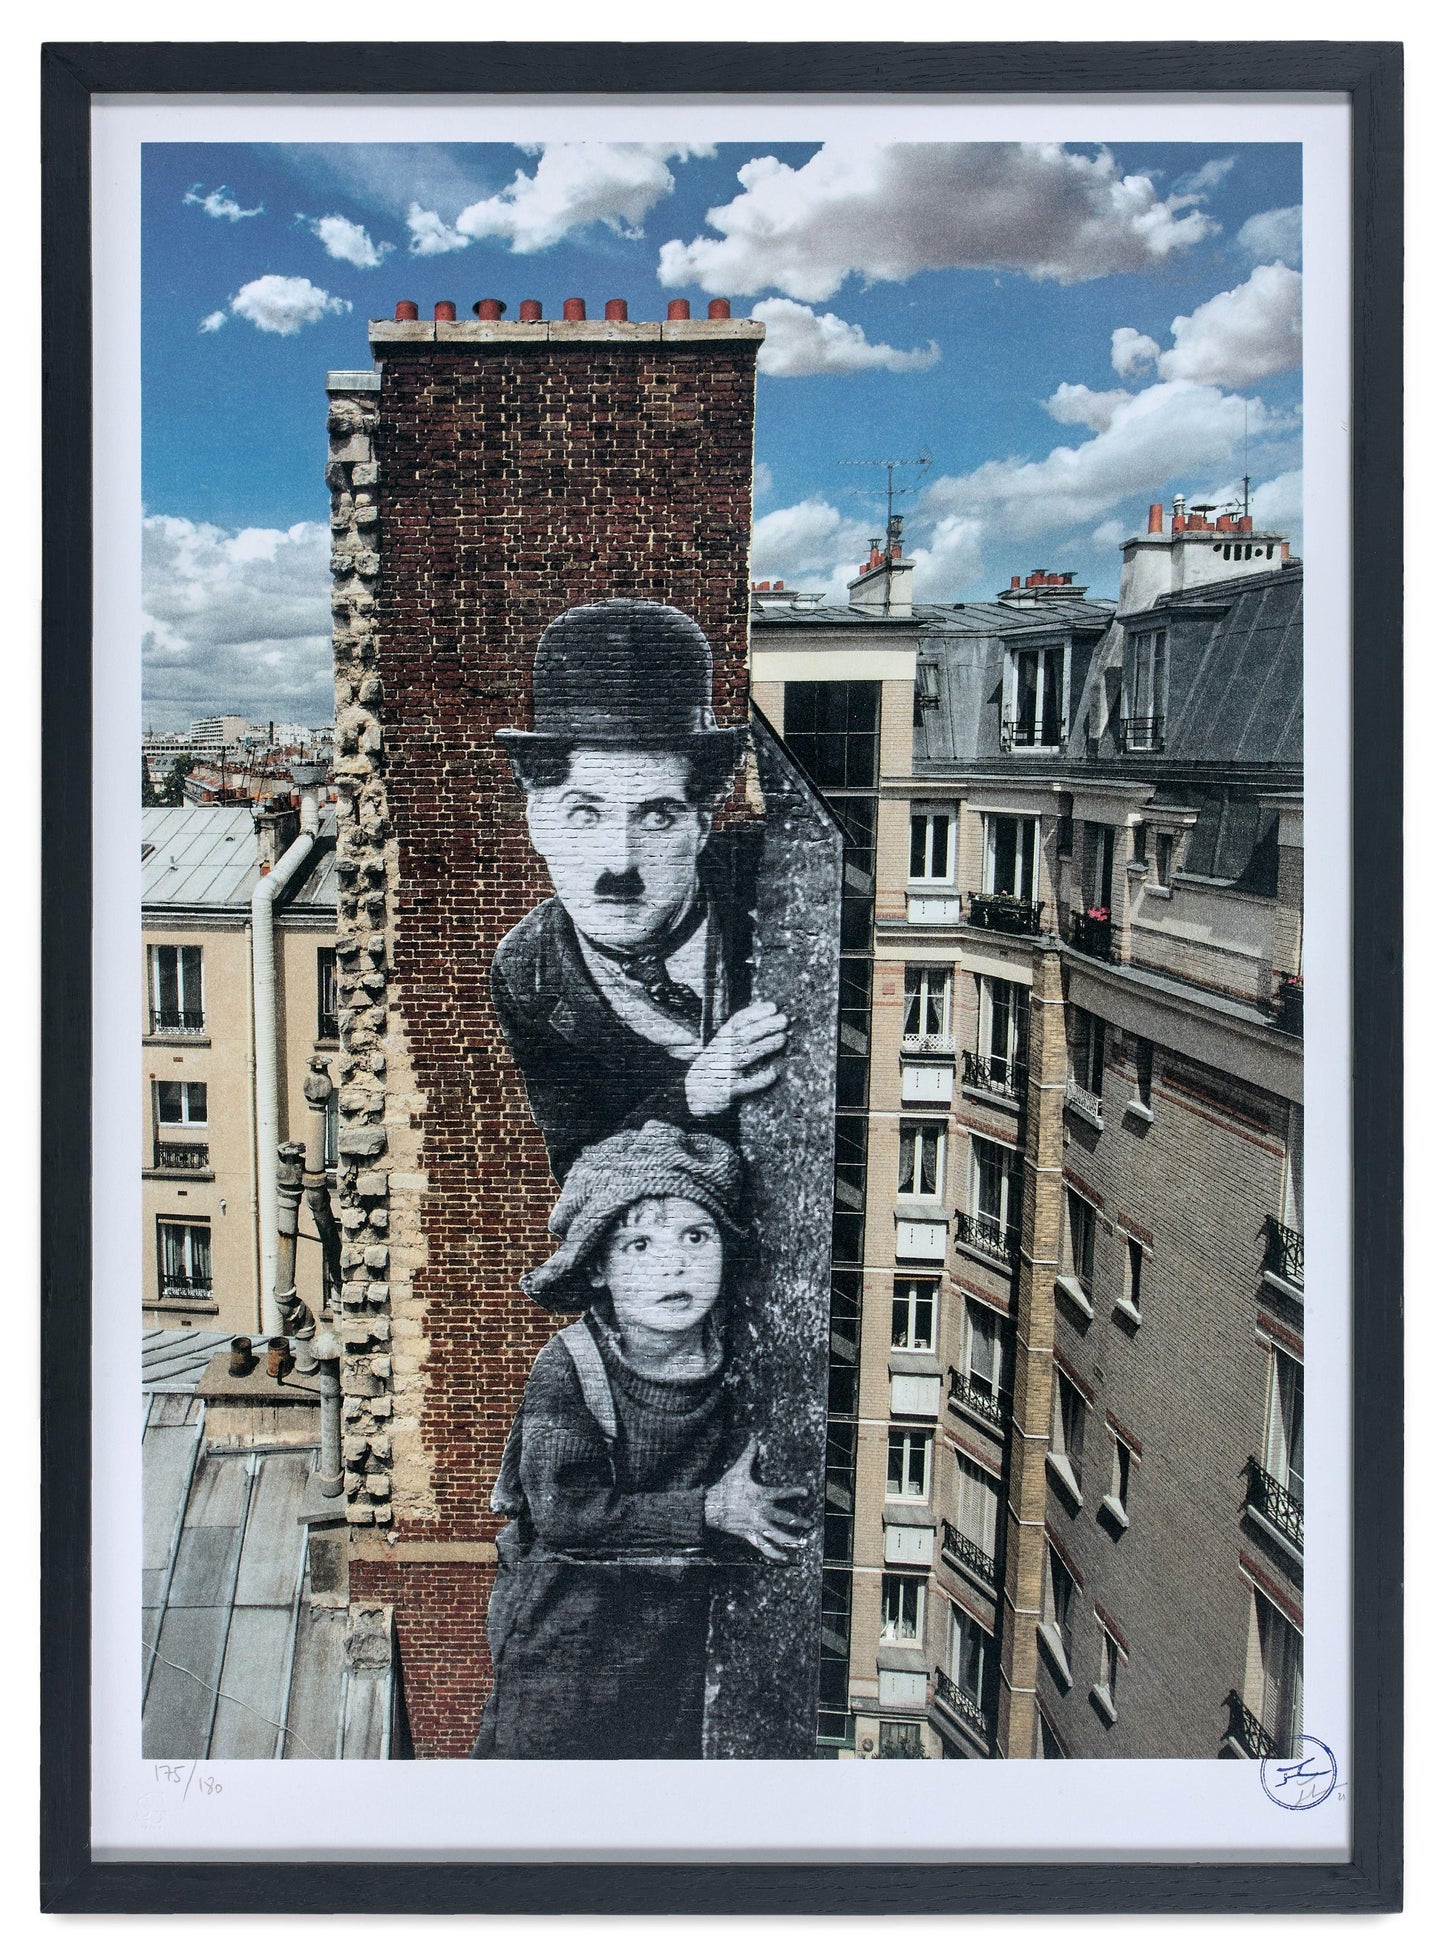 JR - Charlie Chaplin revisited by JR, The Kid, Charlie Chaplin & Jackie Coogan, USA, 1923, by day, Paris, 2021